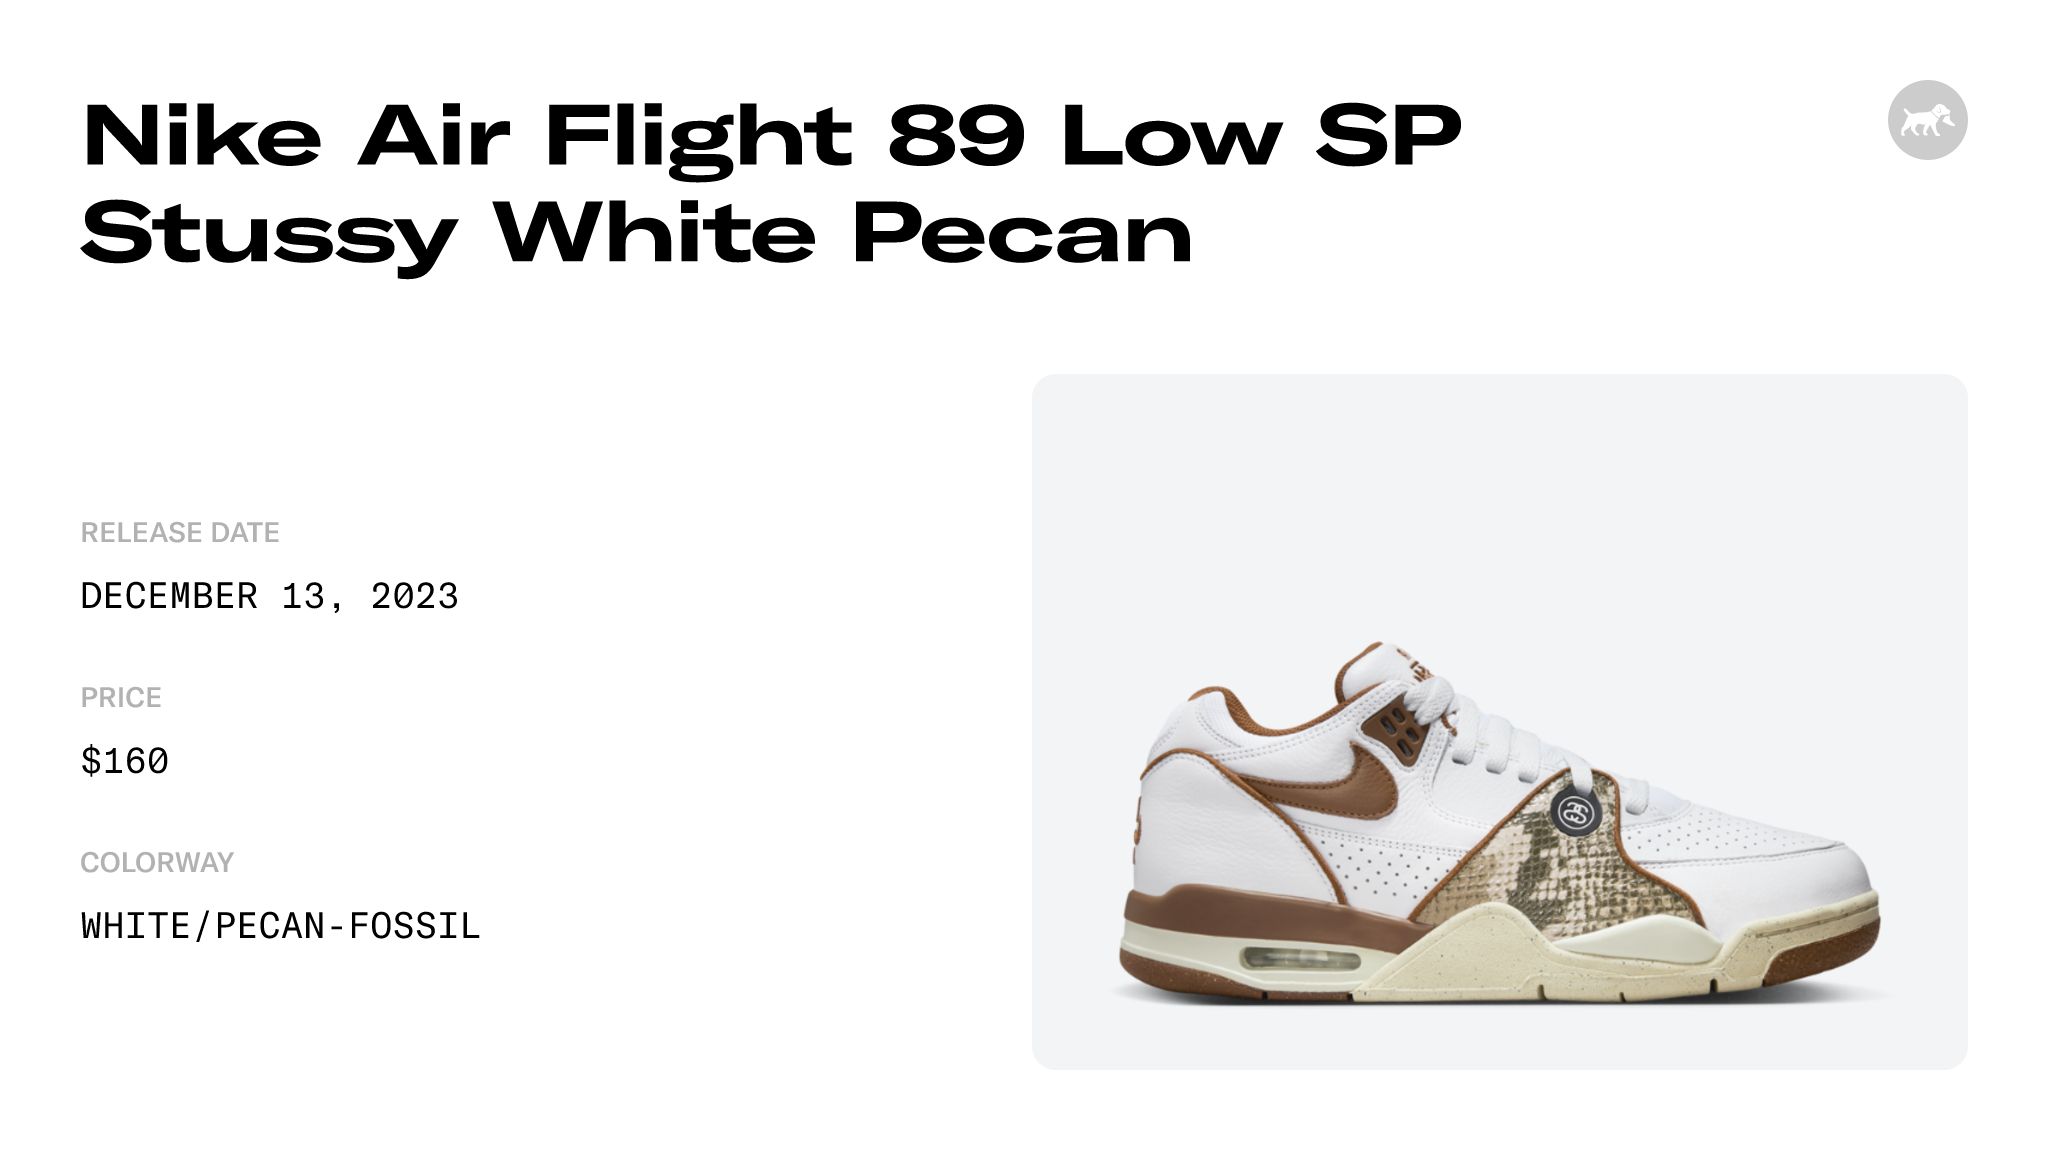 Nike Air Flight 89 Low SP Stussy White Pecan - FD6475-100 Raffles and  Release Date